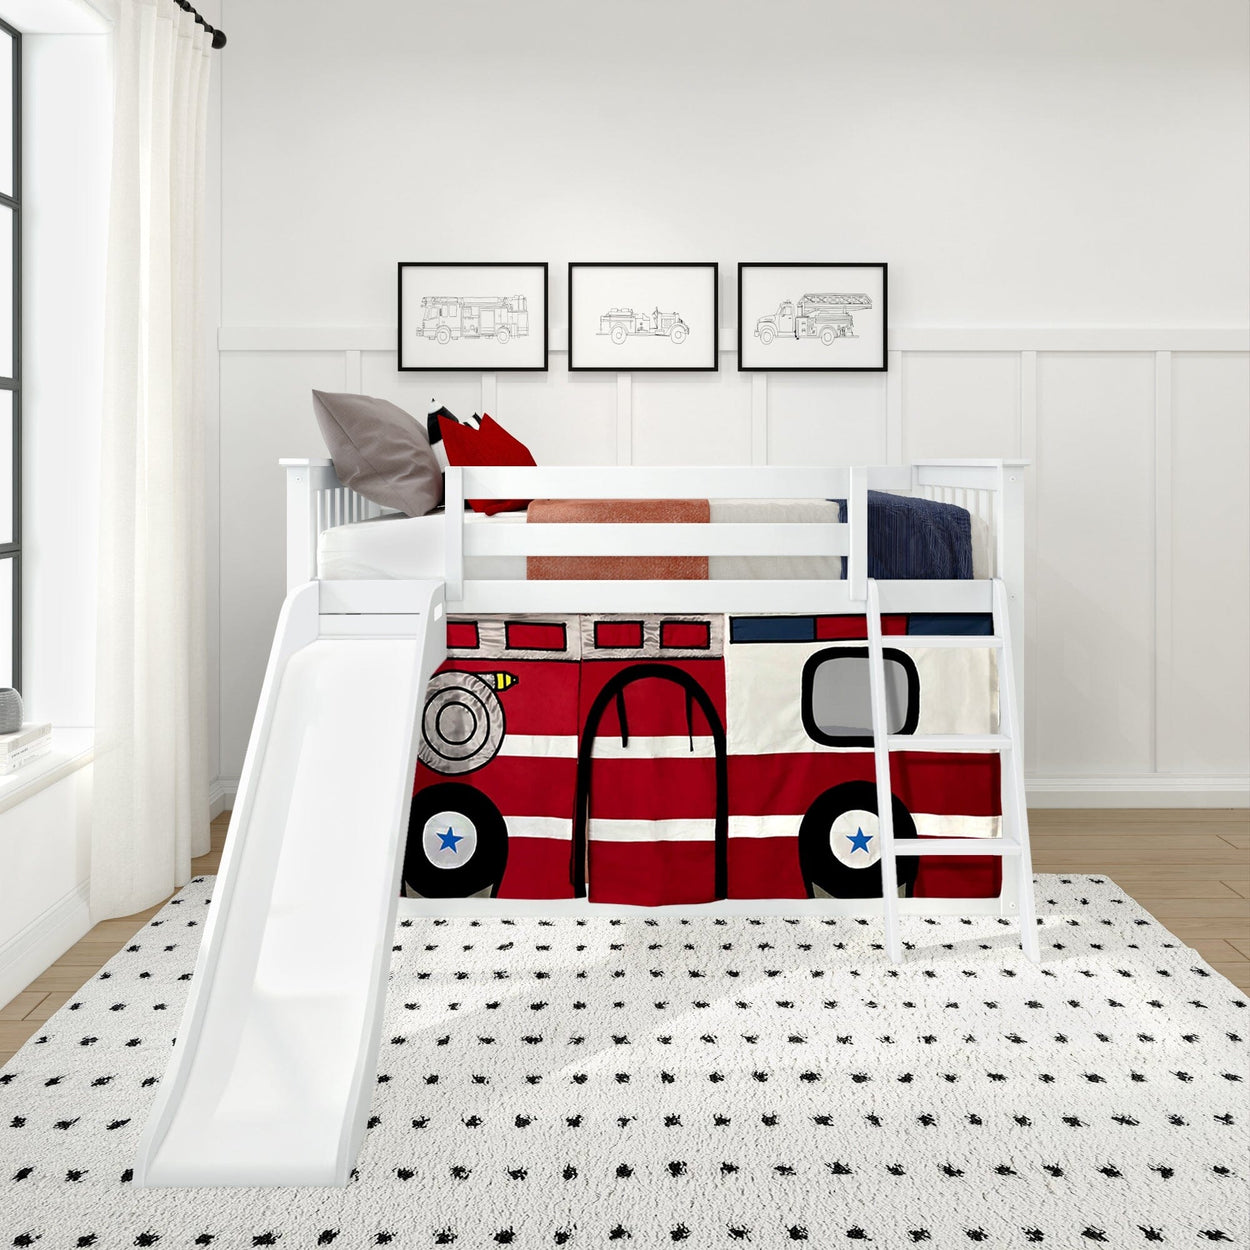 180417002043 : Bunk Beds Low Bunk with Easy Slide and Firetruck Curtain, White